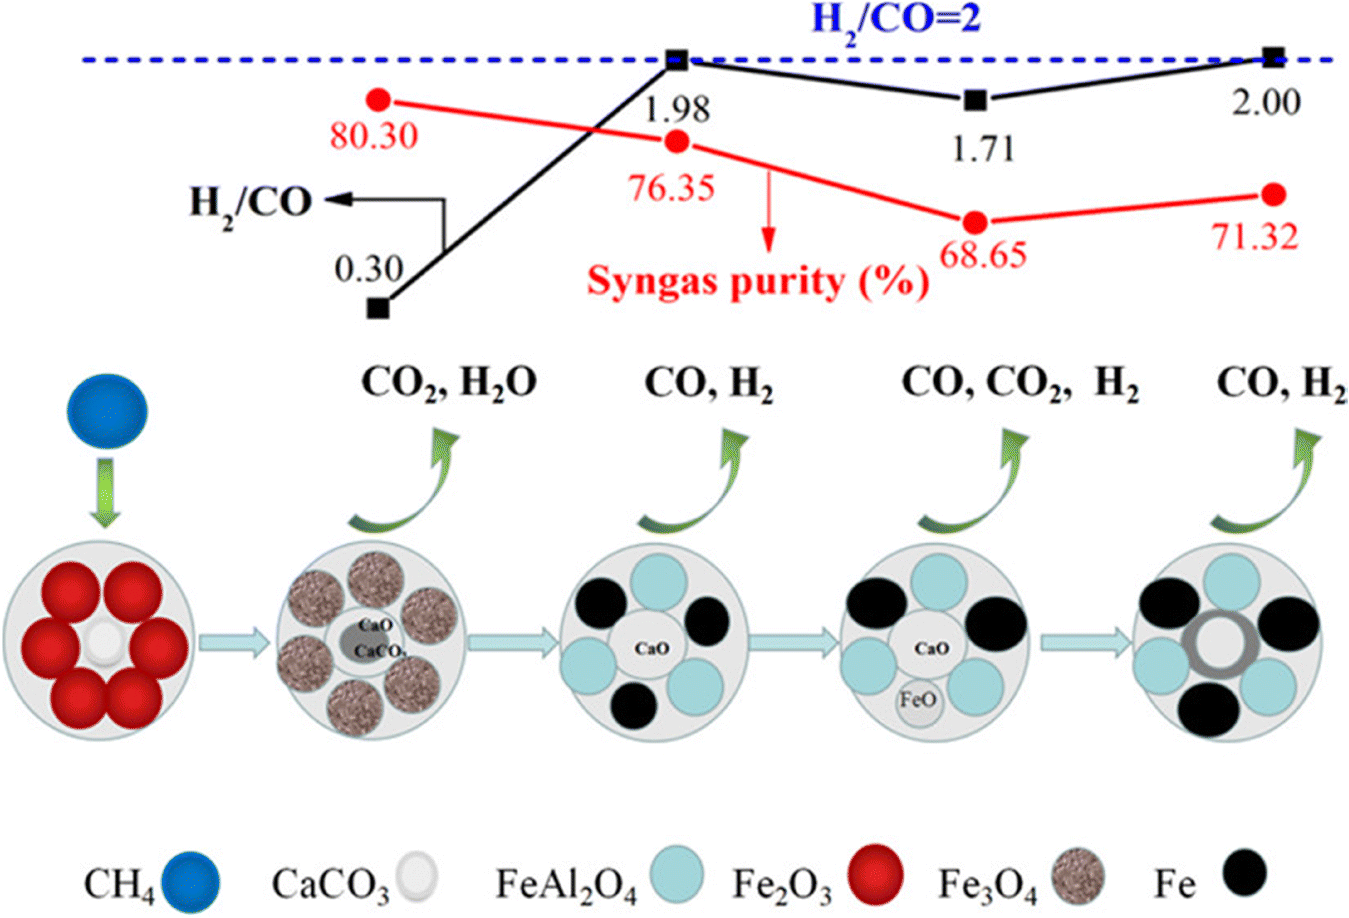 Integrated CO 2 capture and utilization: a review of the 